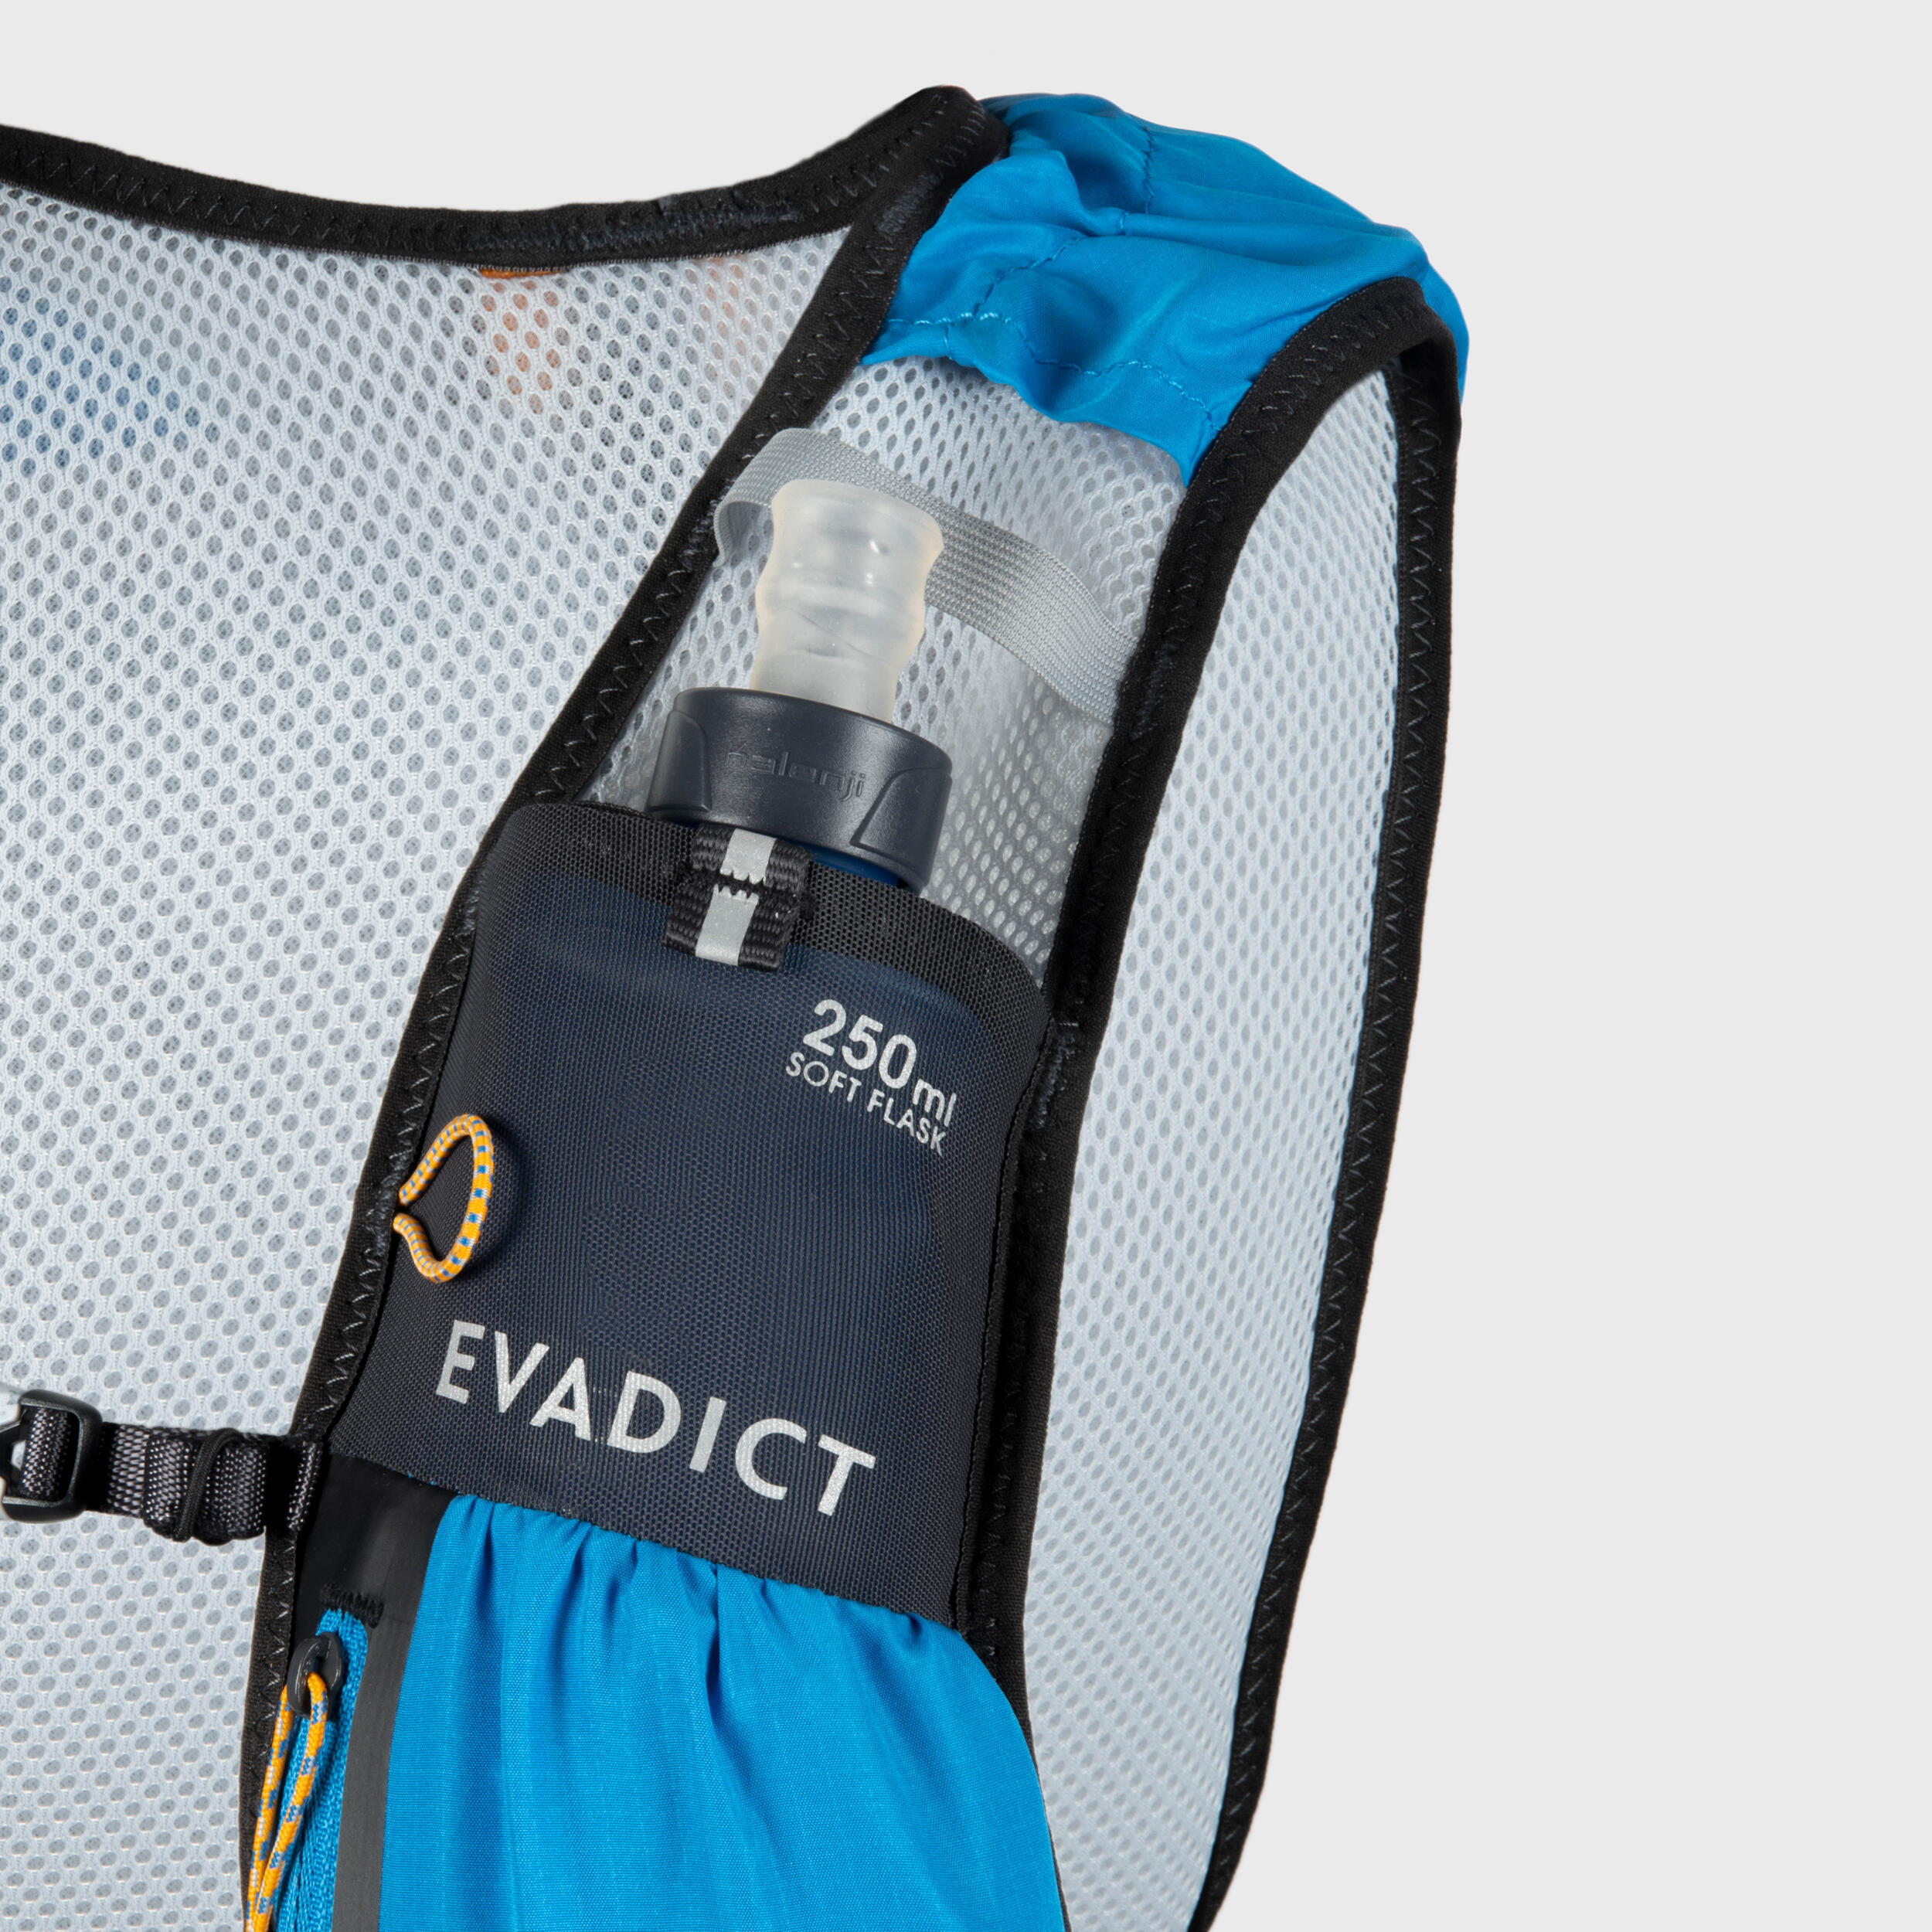 5L TRAIL RUNNING BAG - BLUE - SOLD WITH 1L WATER BLADDER 7/12